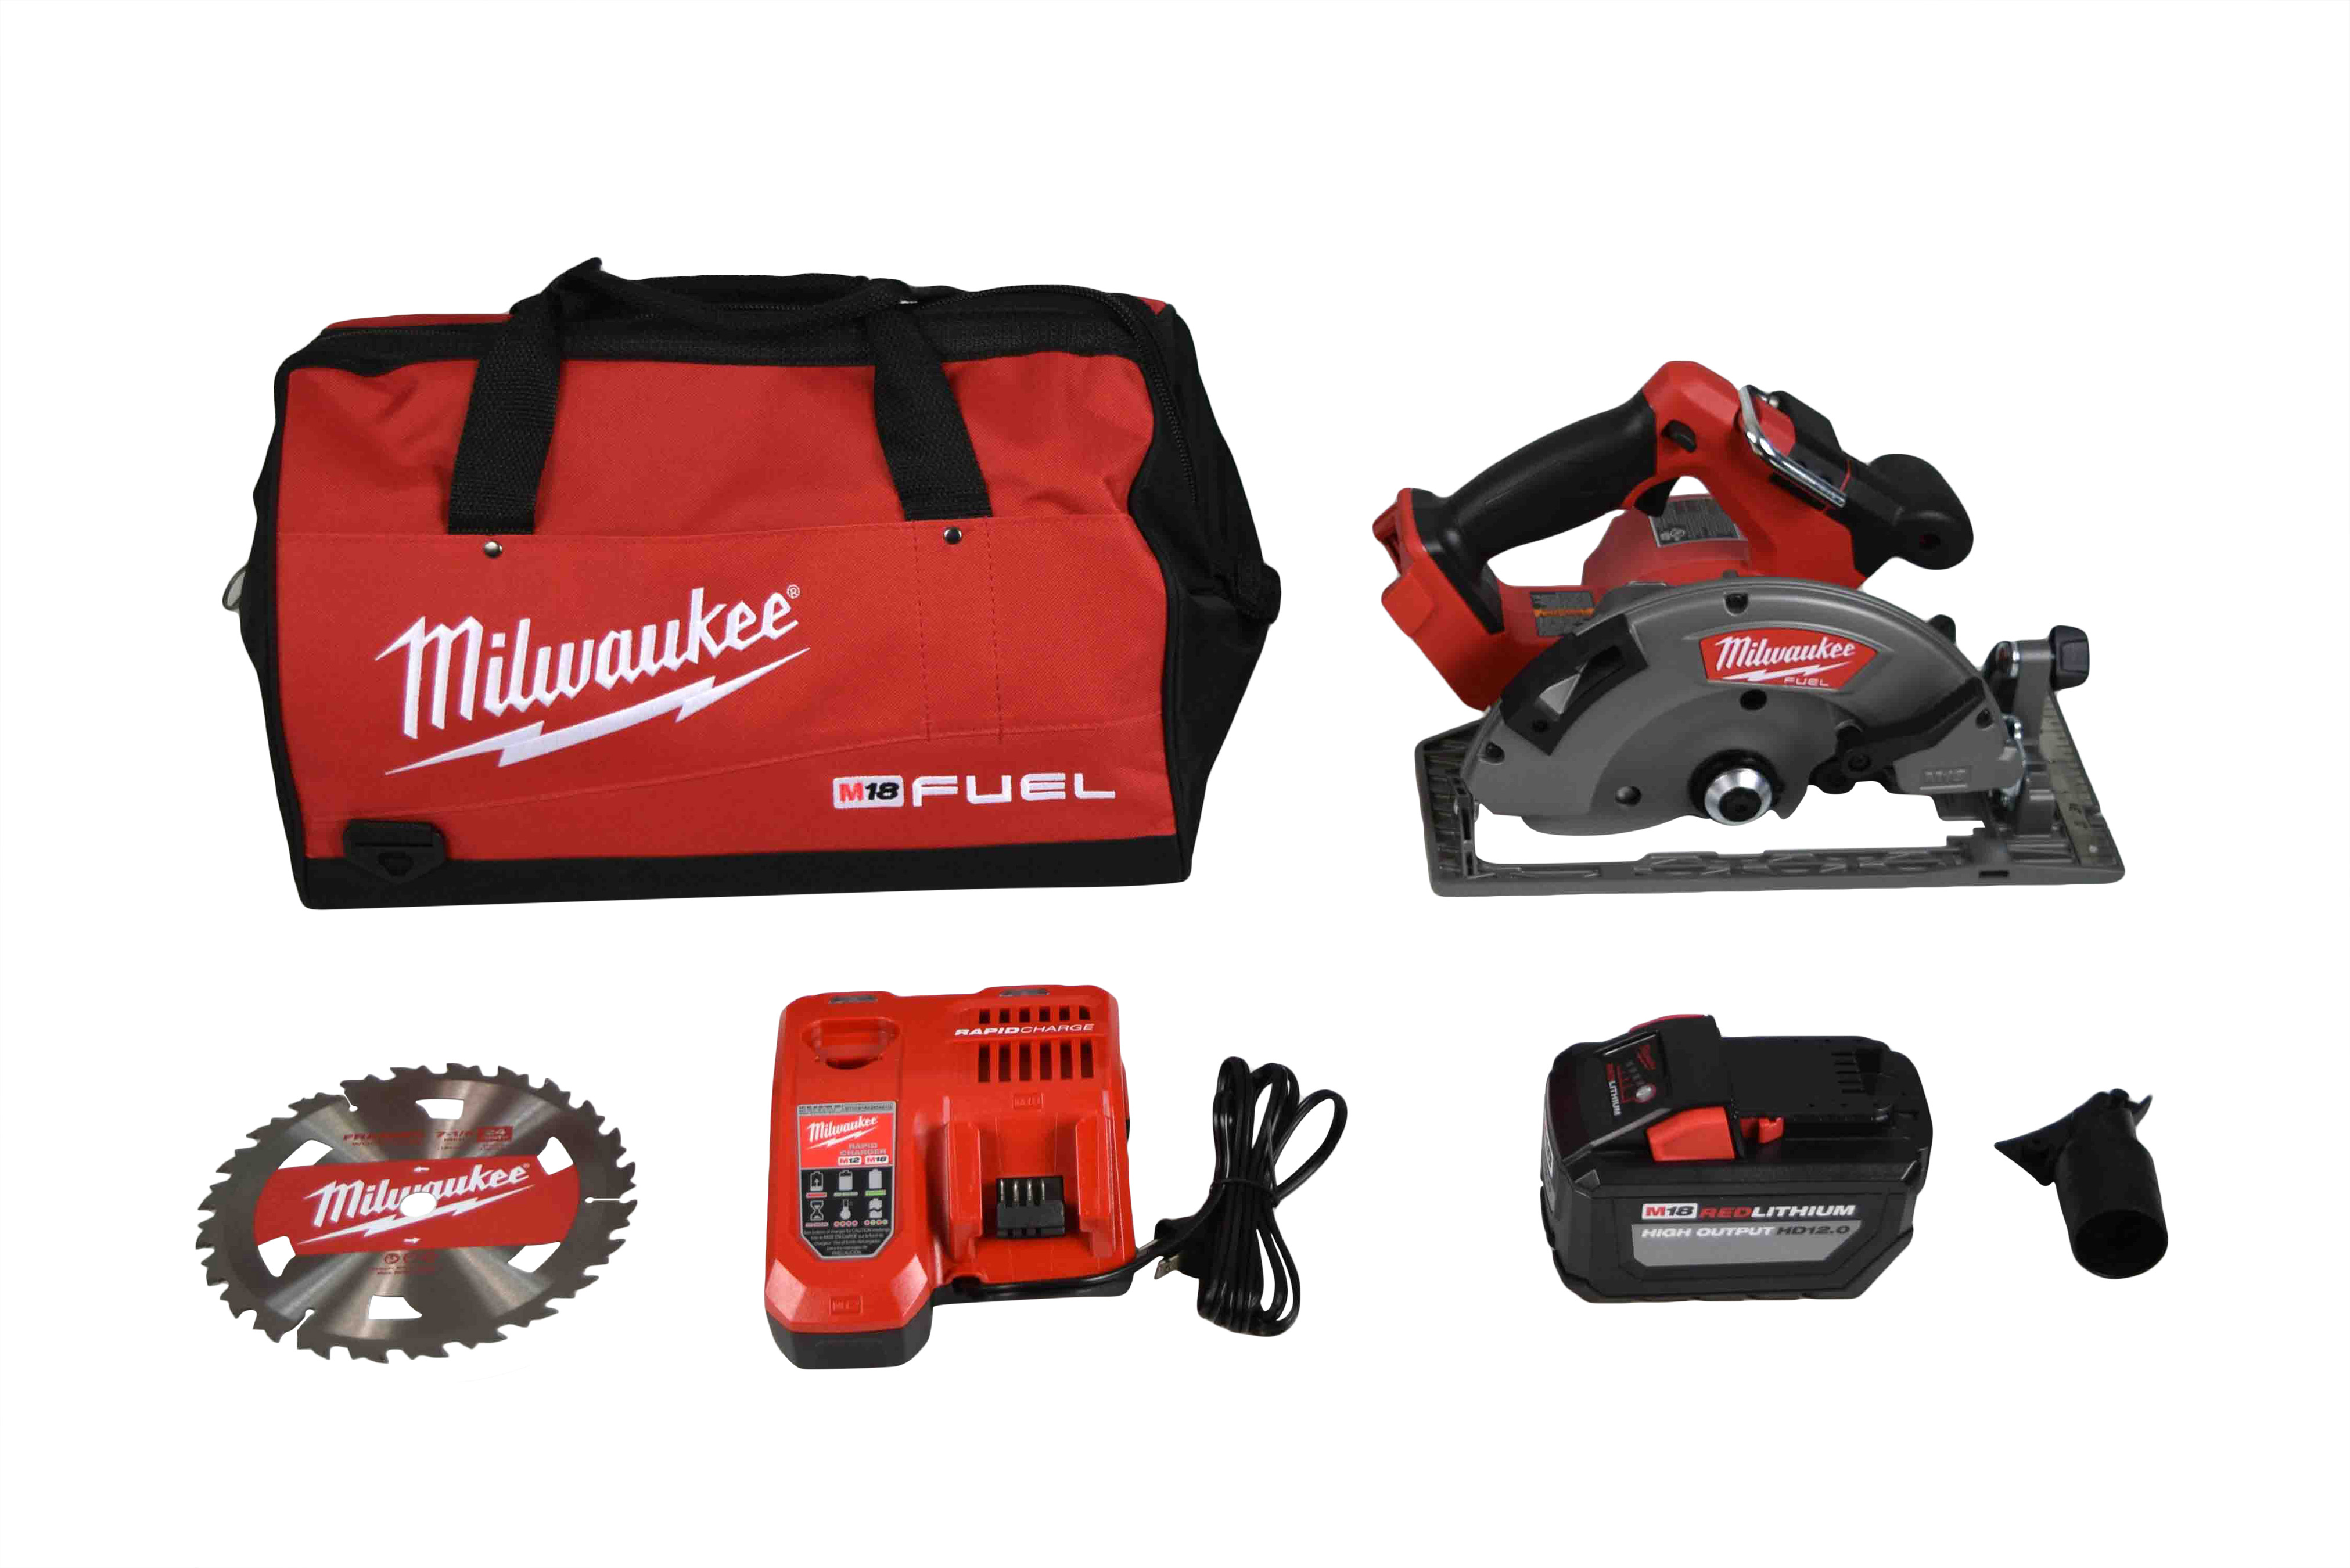 Milwaukee M18 18V Fuel 7-1/4" Circular Saw Kit 2732-21HD with 12Ah Battery, Charger, Contractor Tool Bag - image 1 of 9